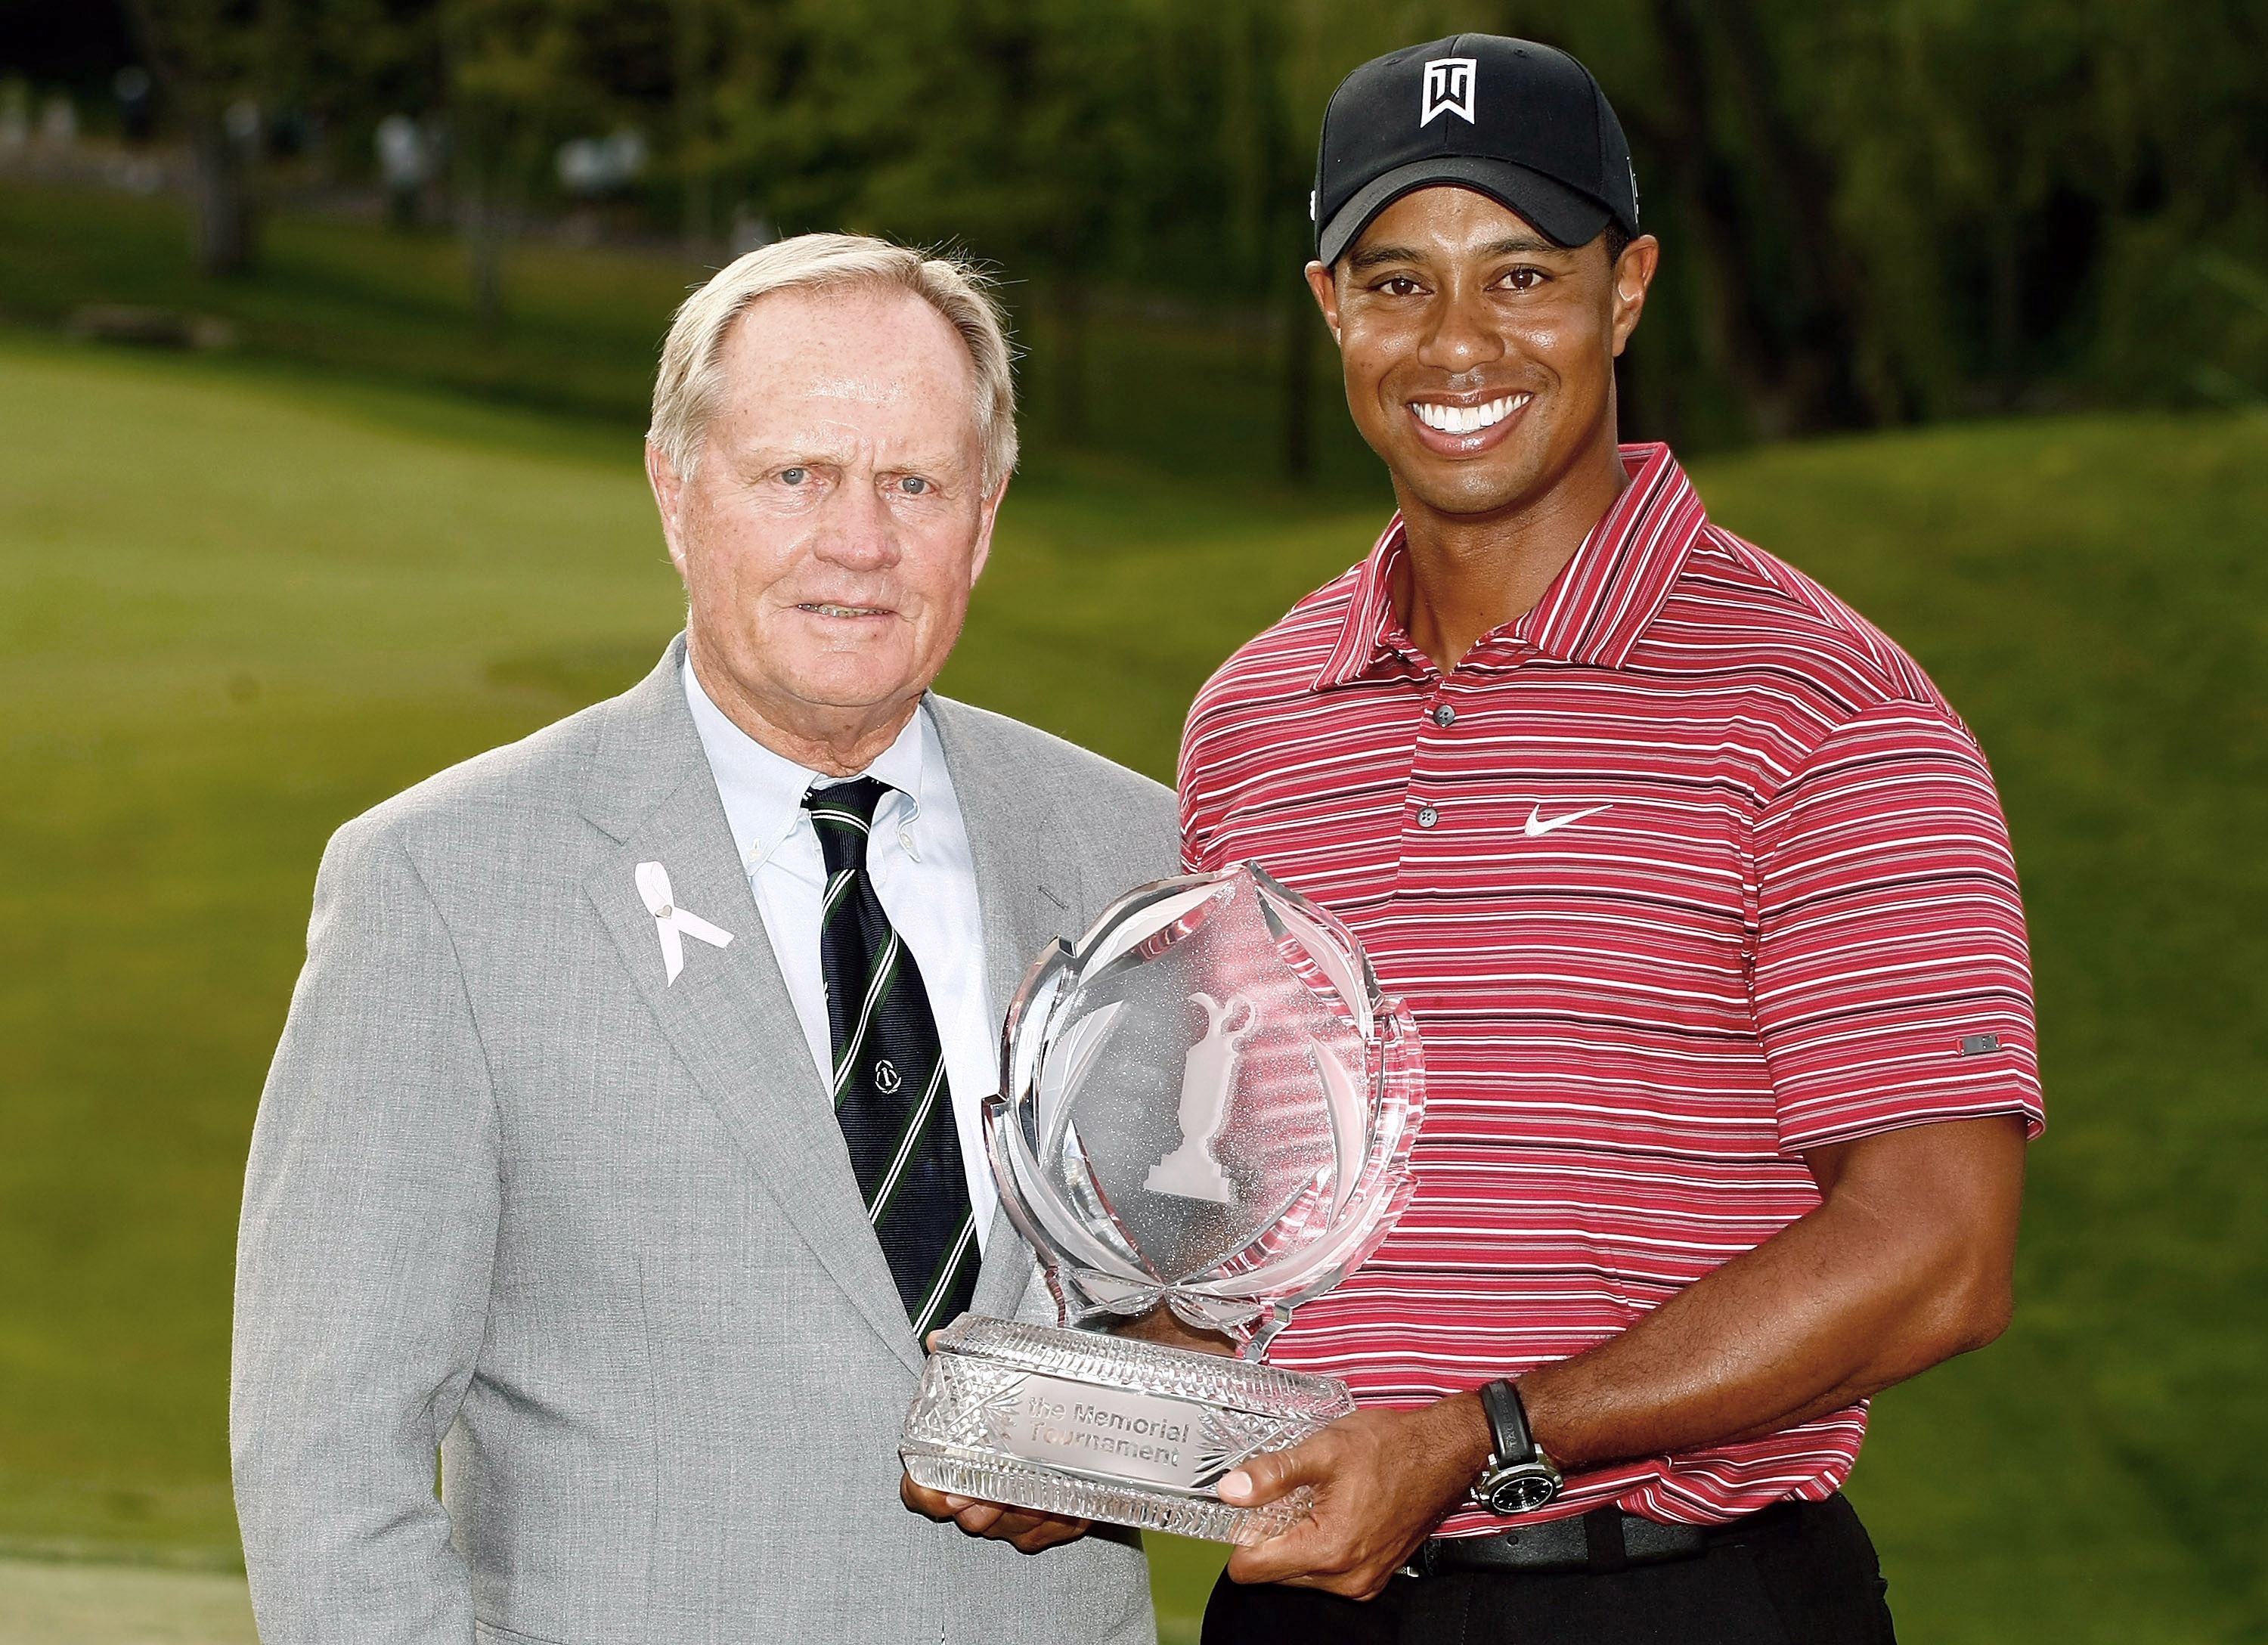 DUBLIN, OH - JUNE 07: Jack Nicklaus presents Tiger Woods with the trophy after his one-stroke victory at the Memorial Tournament at the Muirfield Village Golf Club on June 7, 2009 in Dublin, Ohio. (Photo by Scott Halleran/Getty Images)